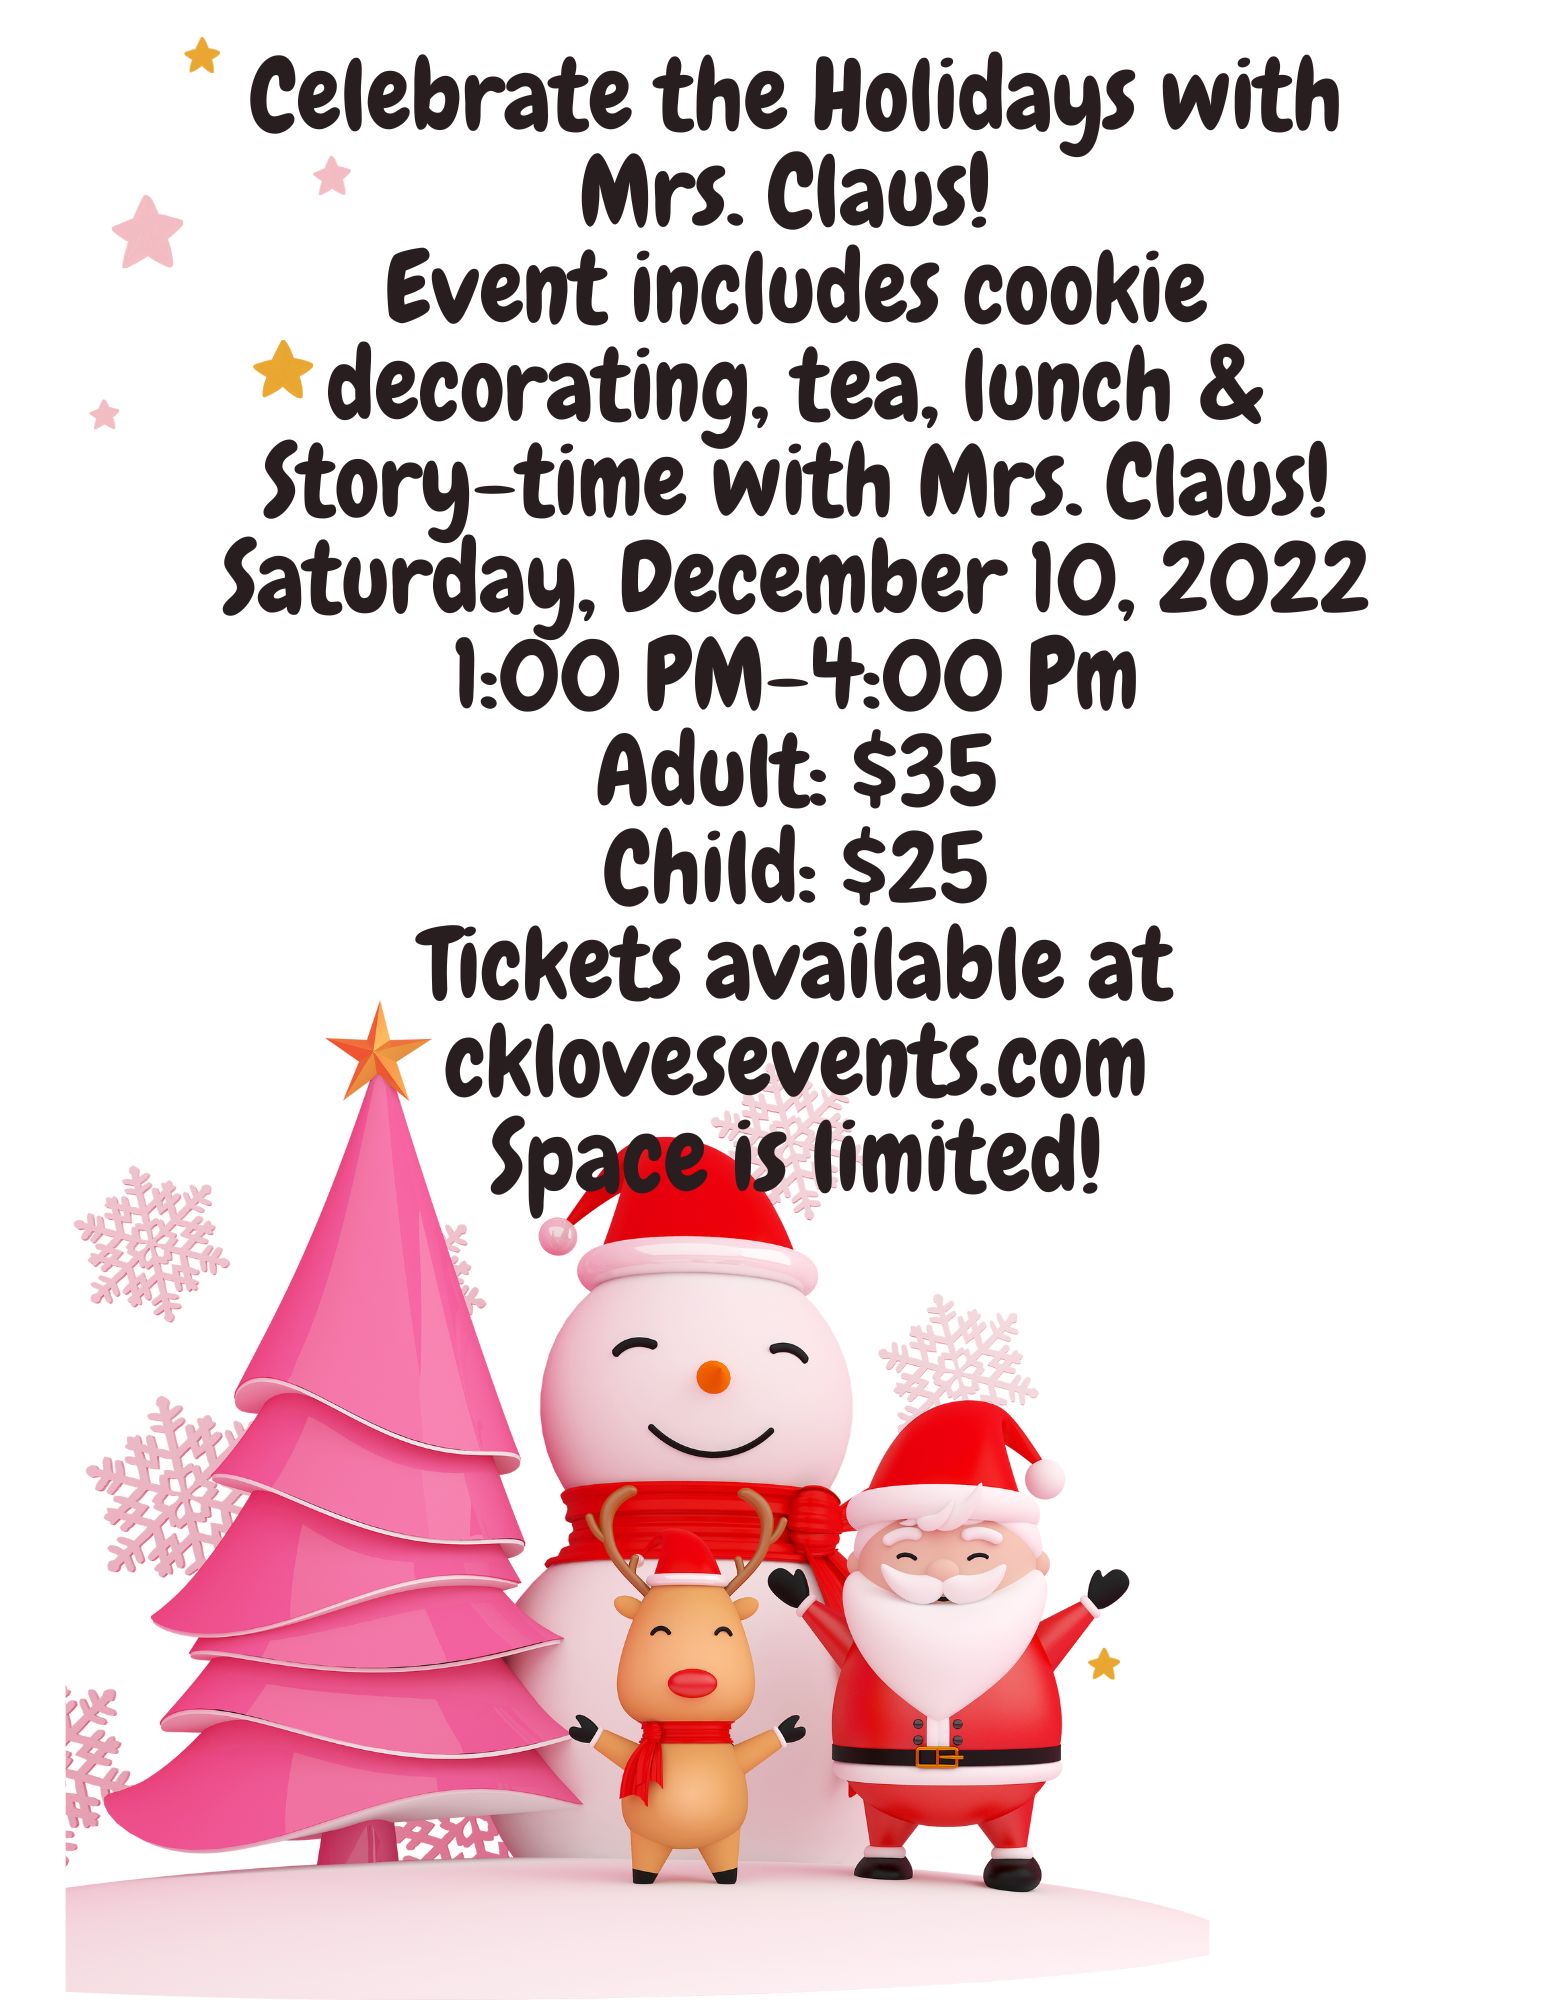 Holiday Event - Adult Ticket